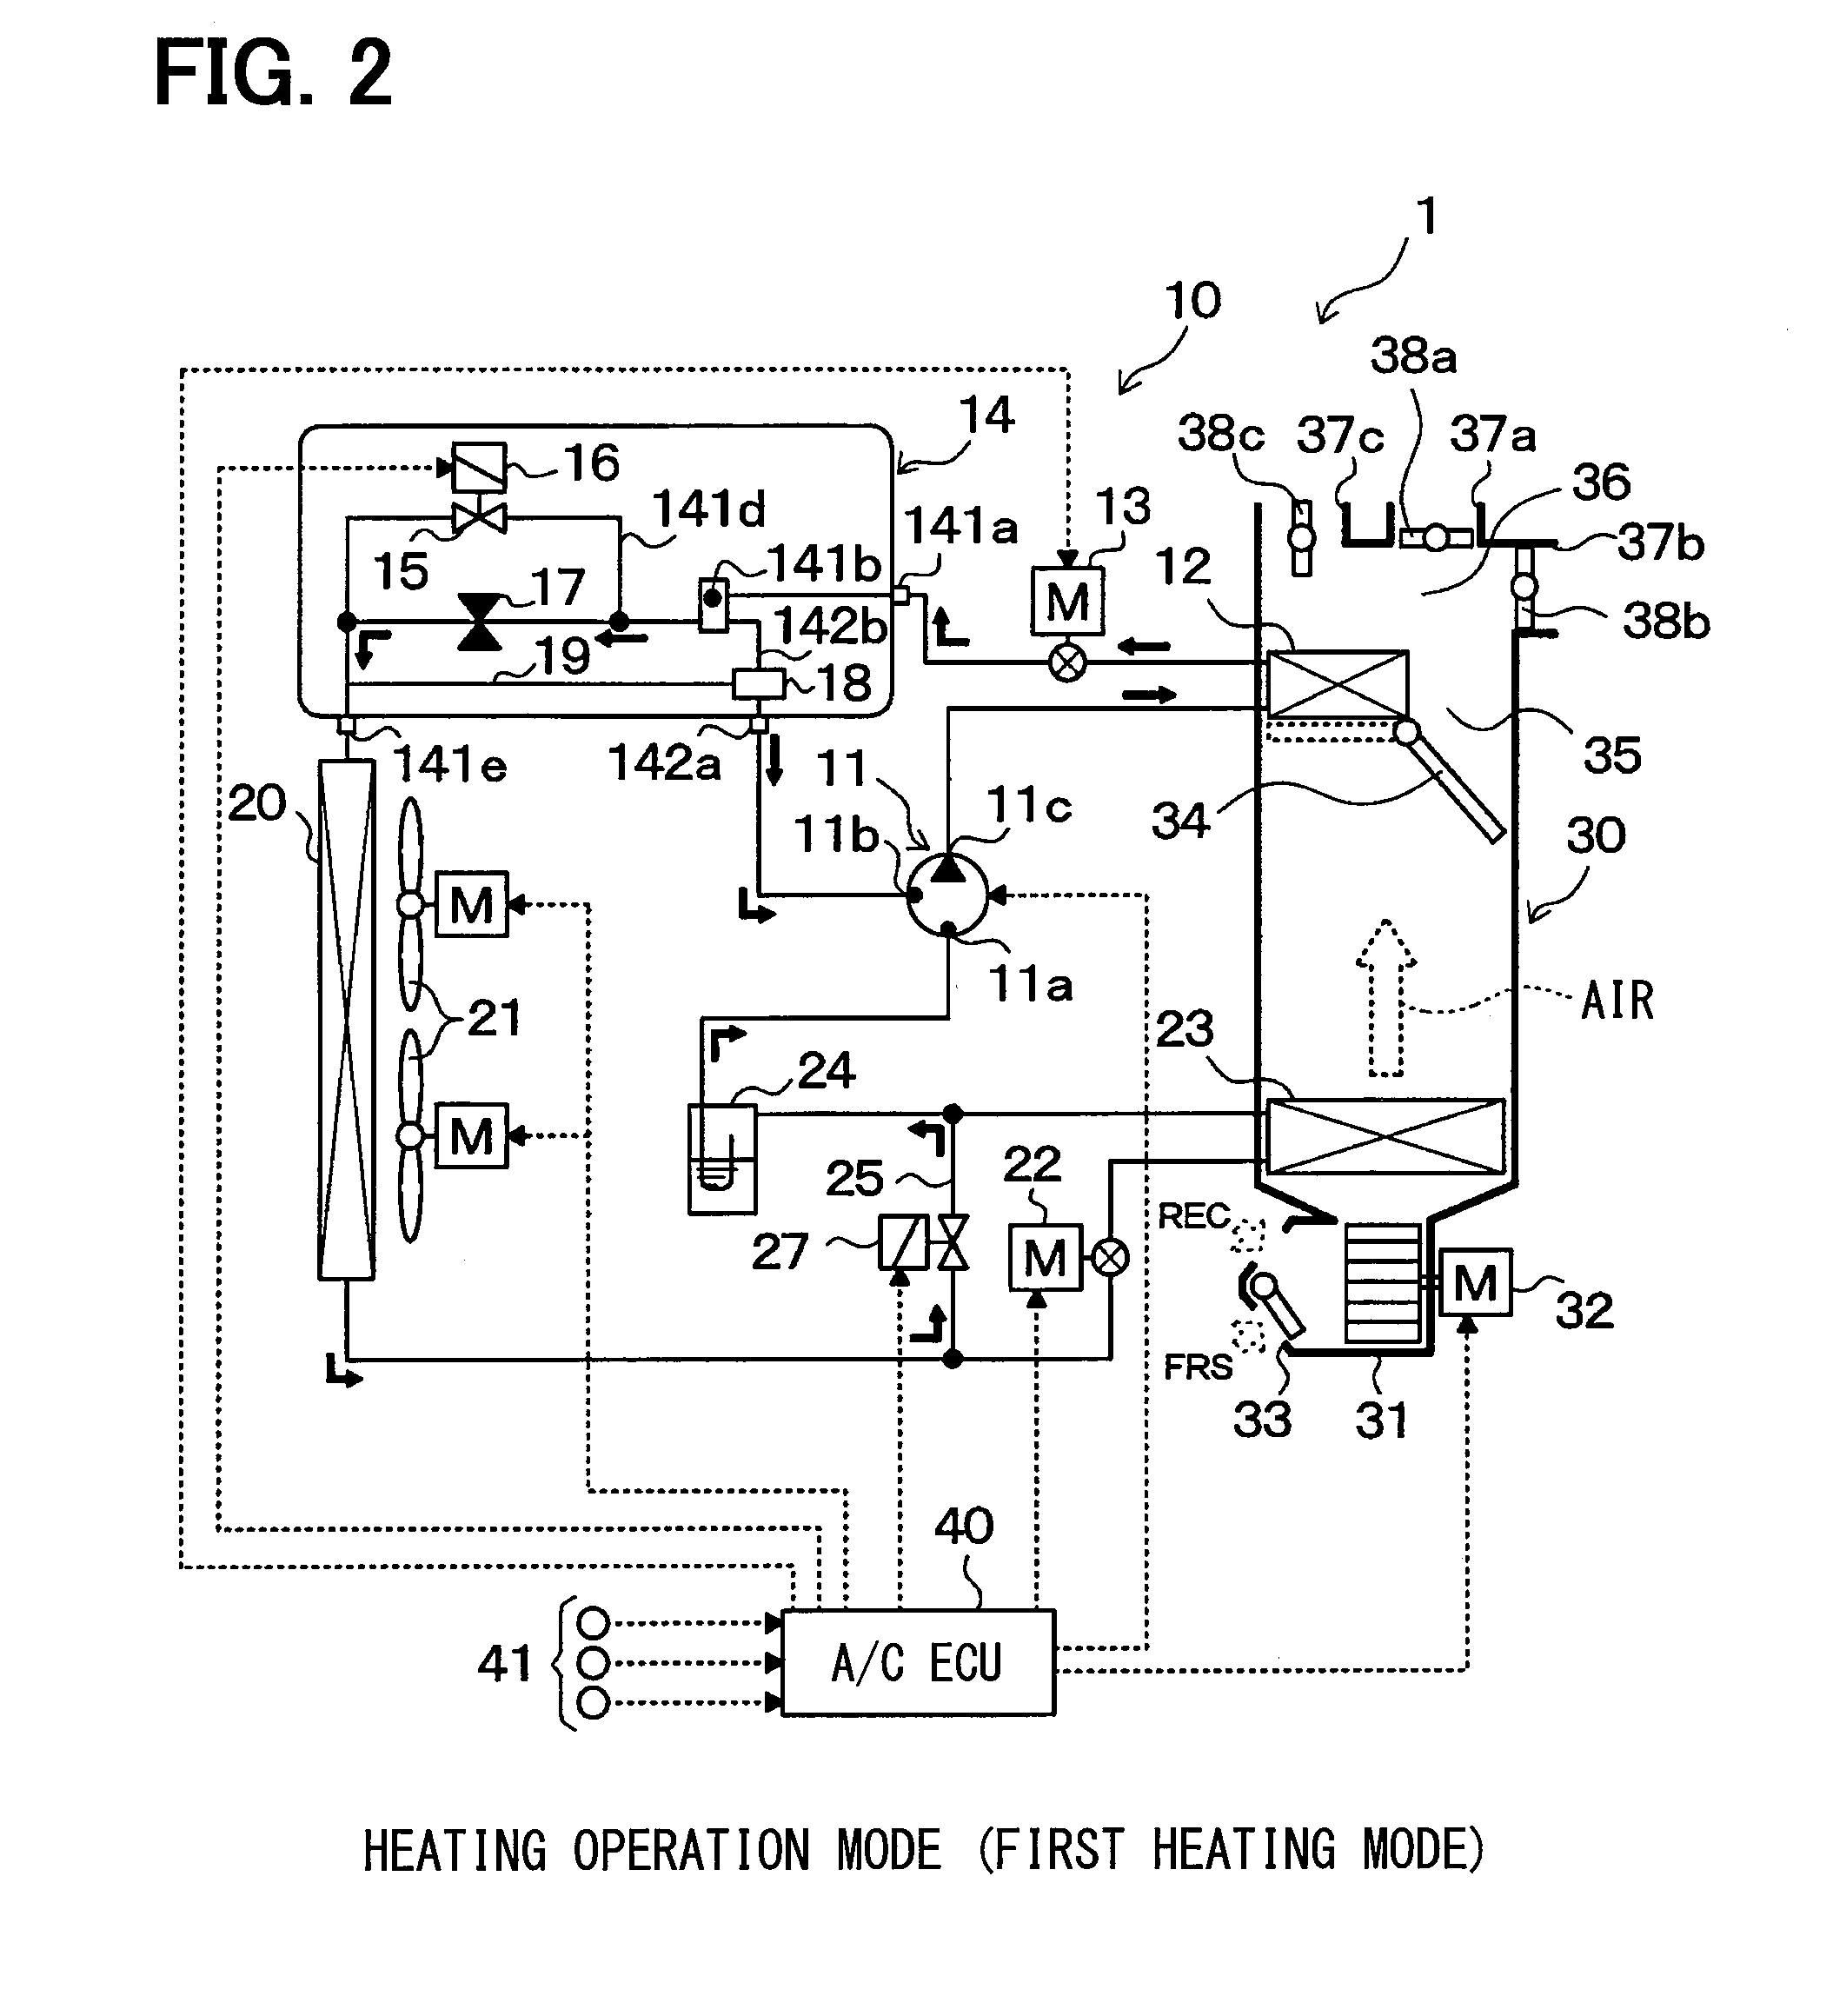 Integration valve and heat pump cycle